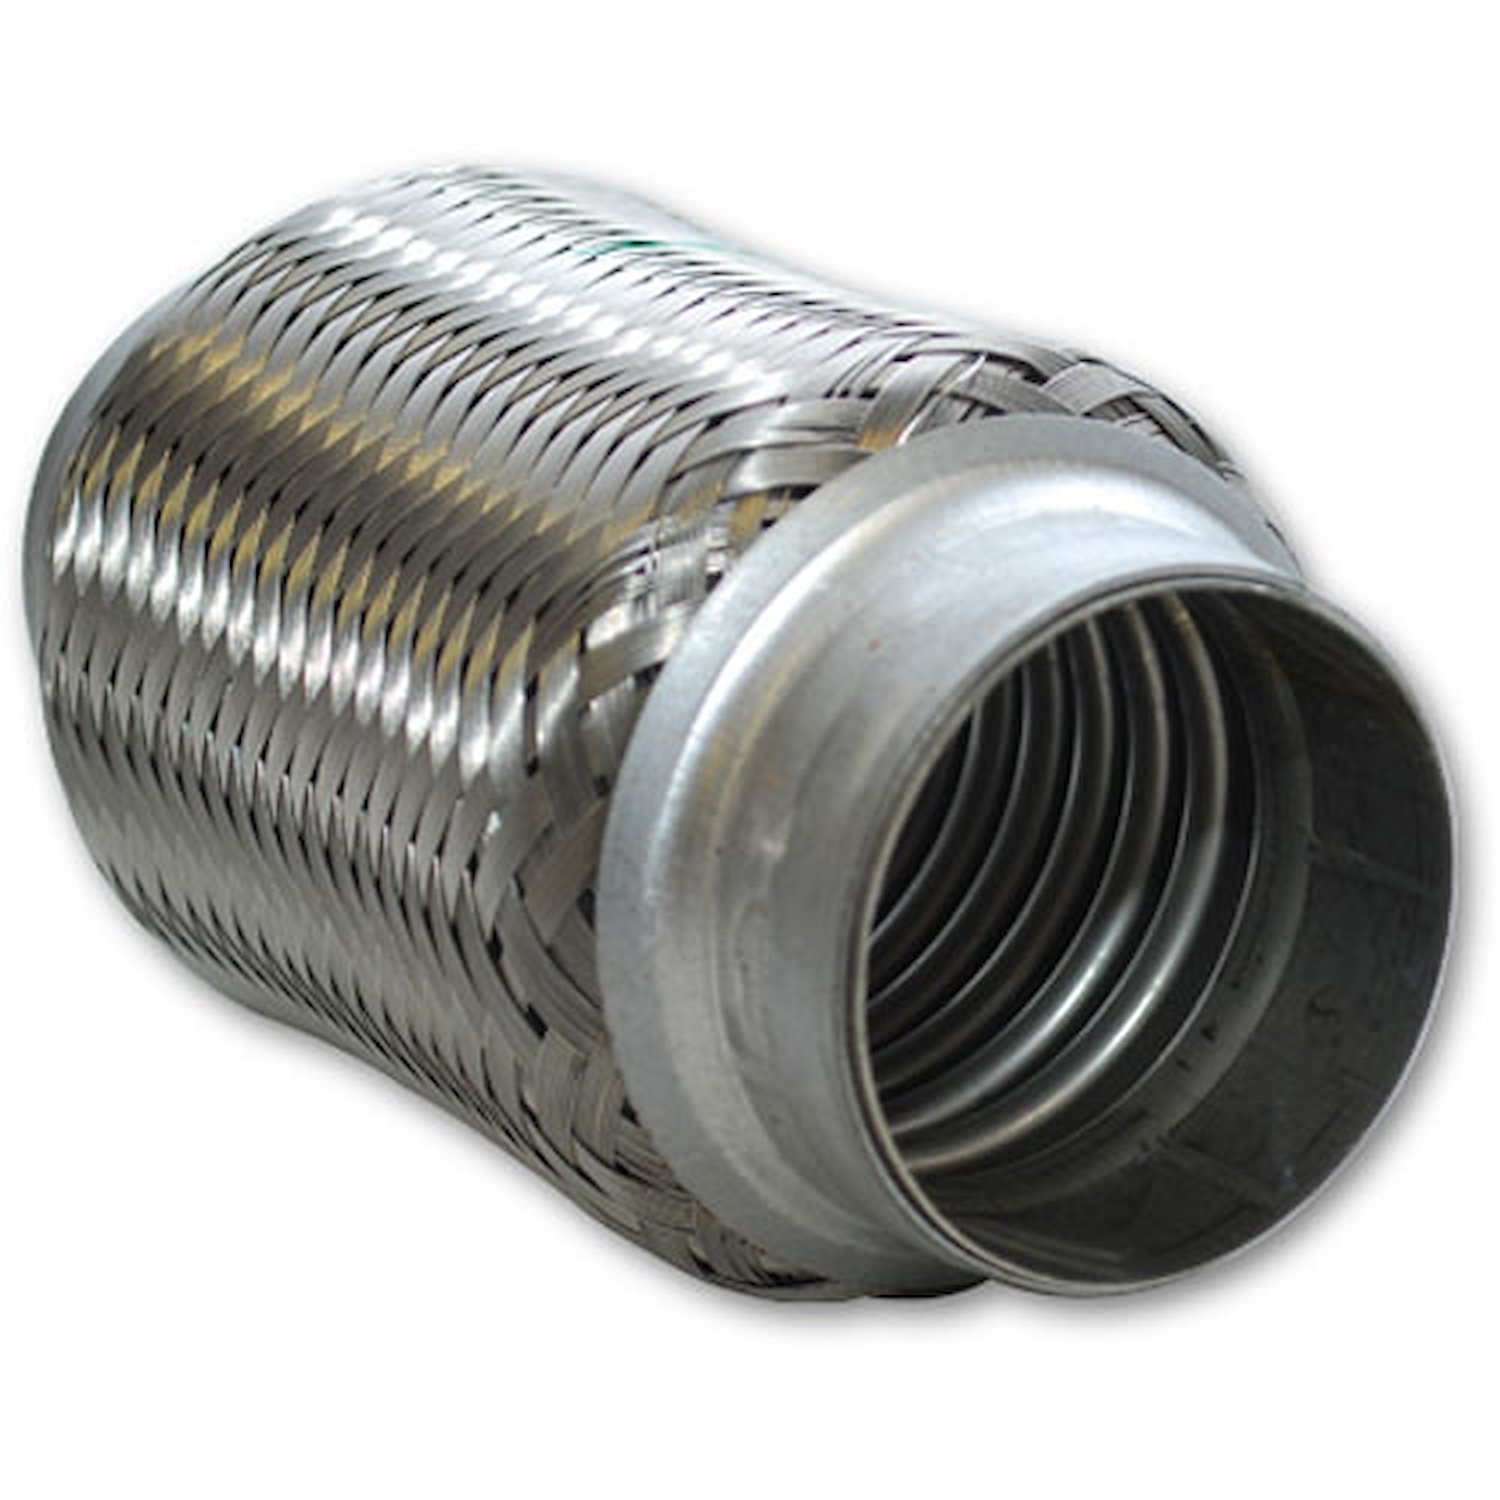 Standard Flex Coupling Without Inner Liner 1.5" Inlet/Outlet Diamater